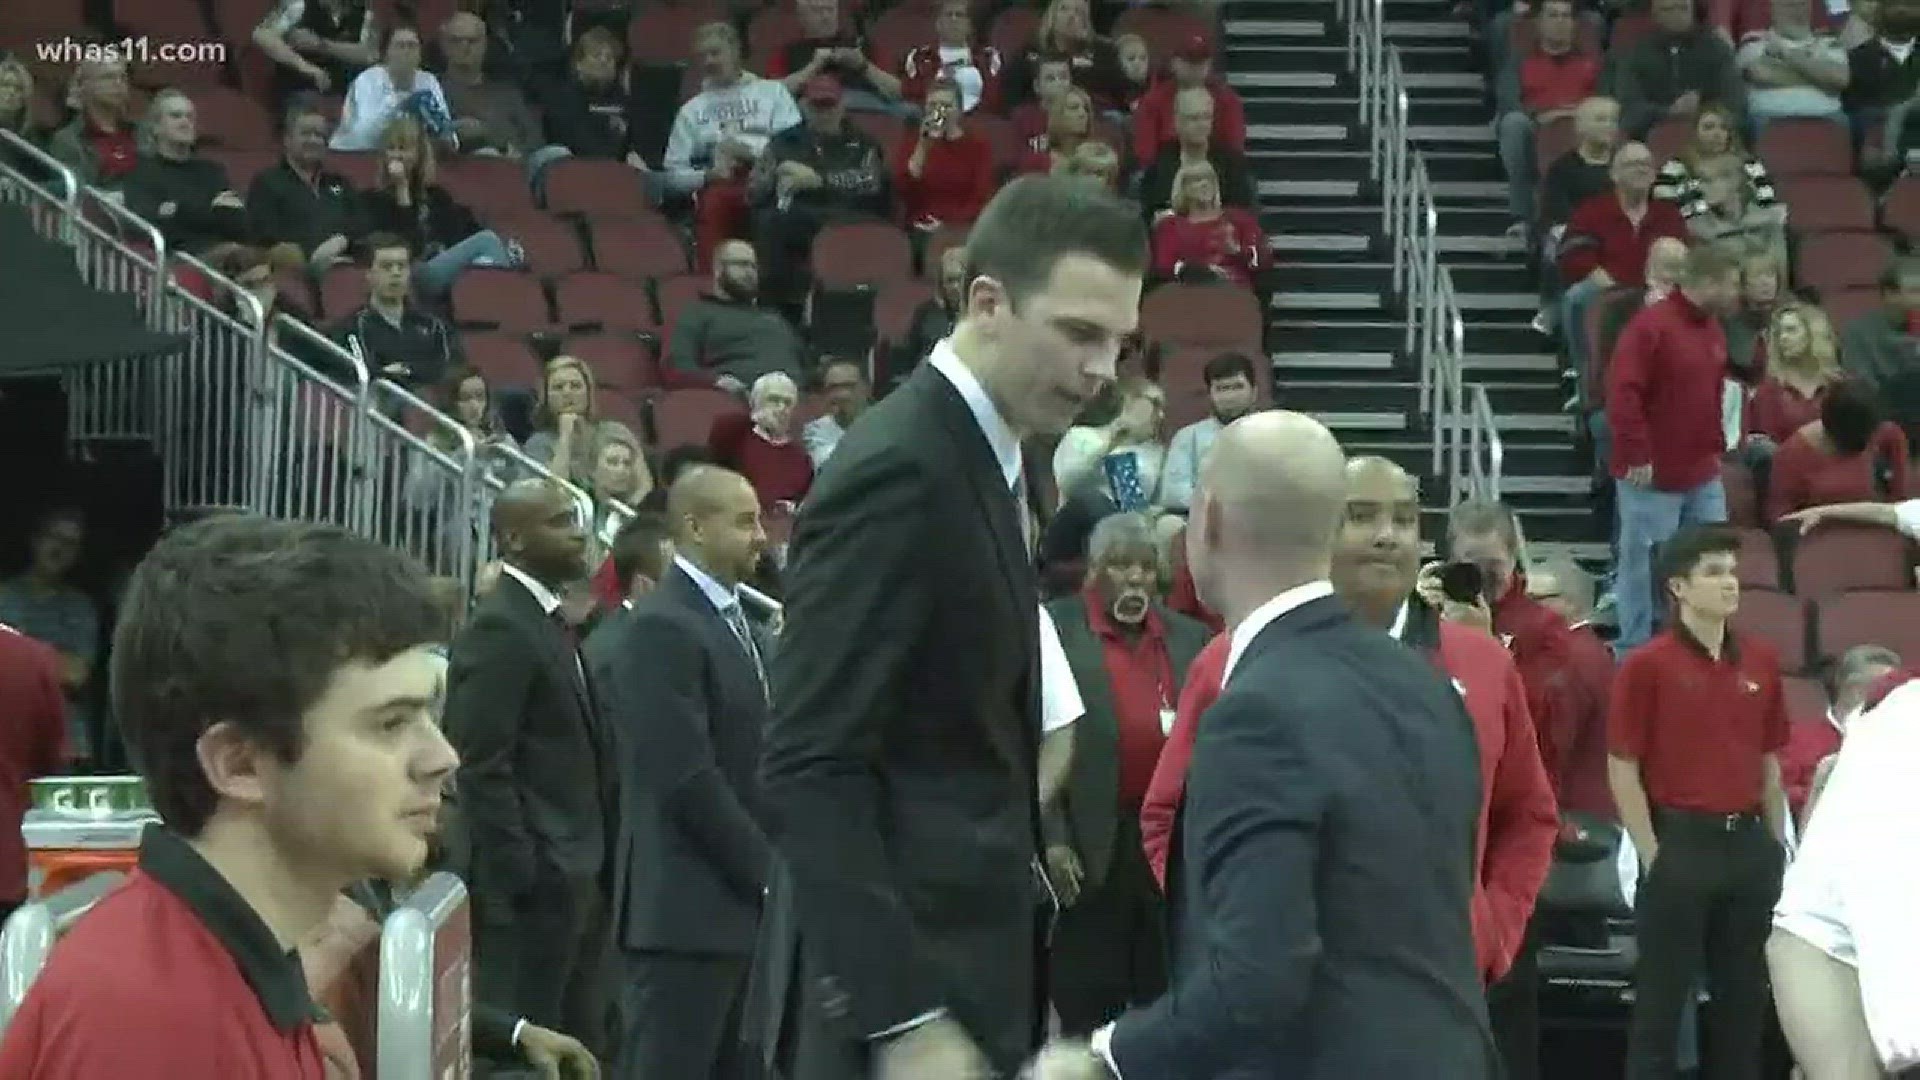 Mixed reactions to Padgett decision